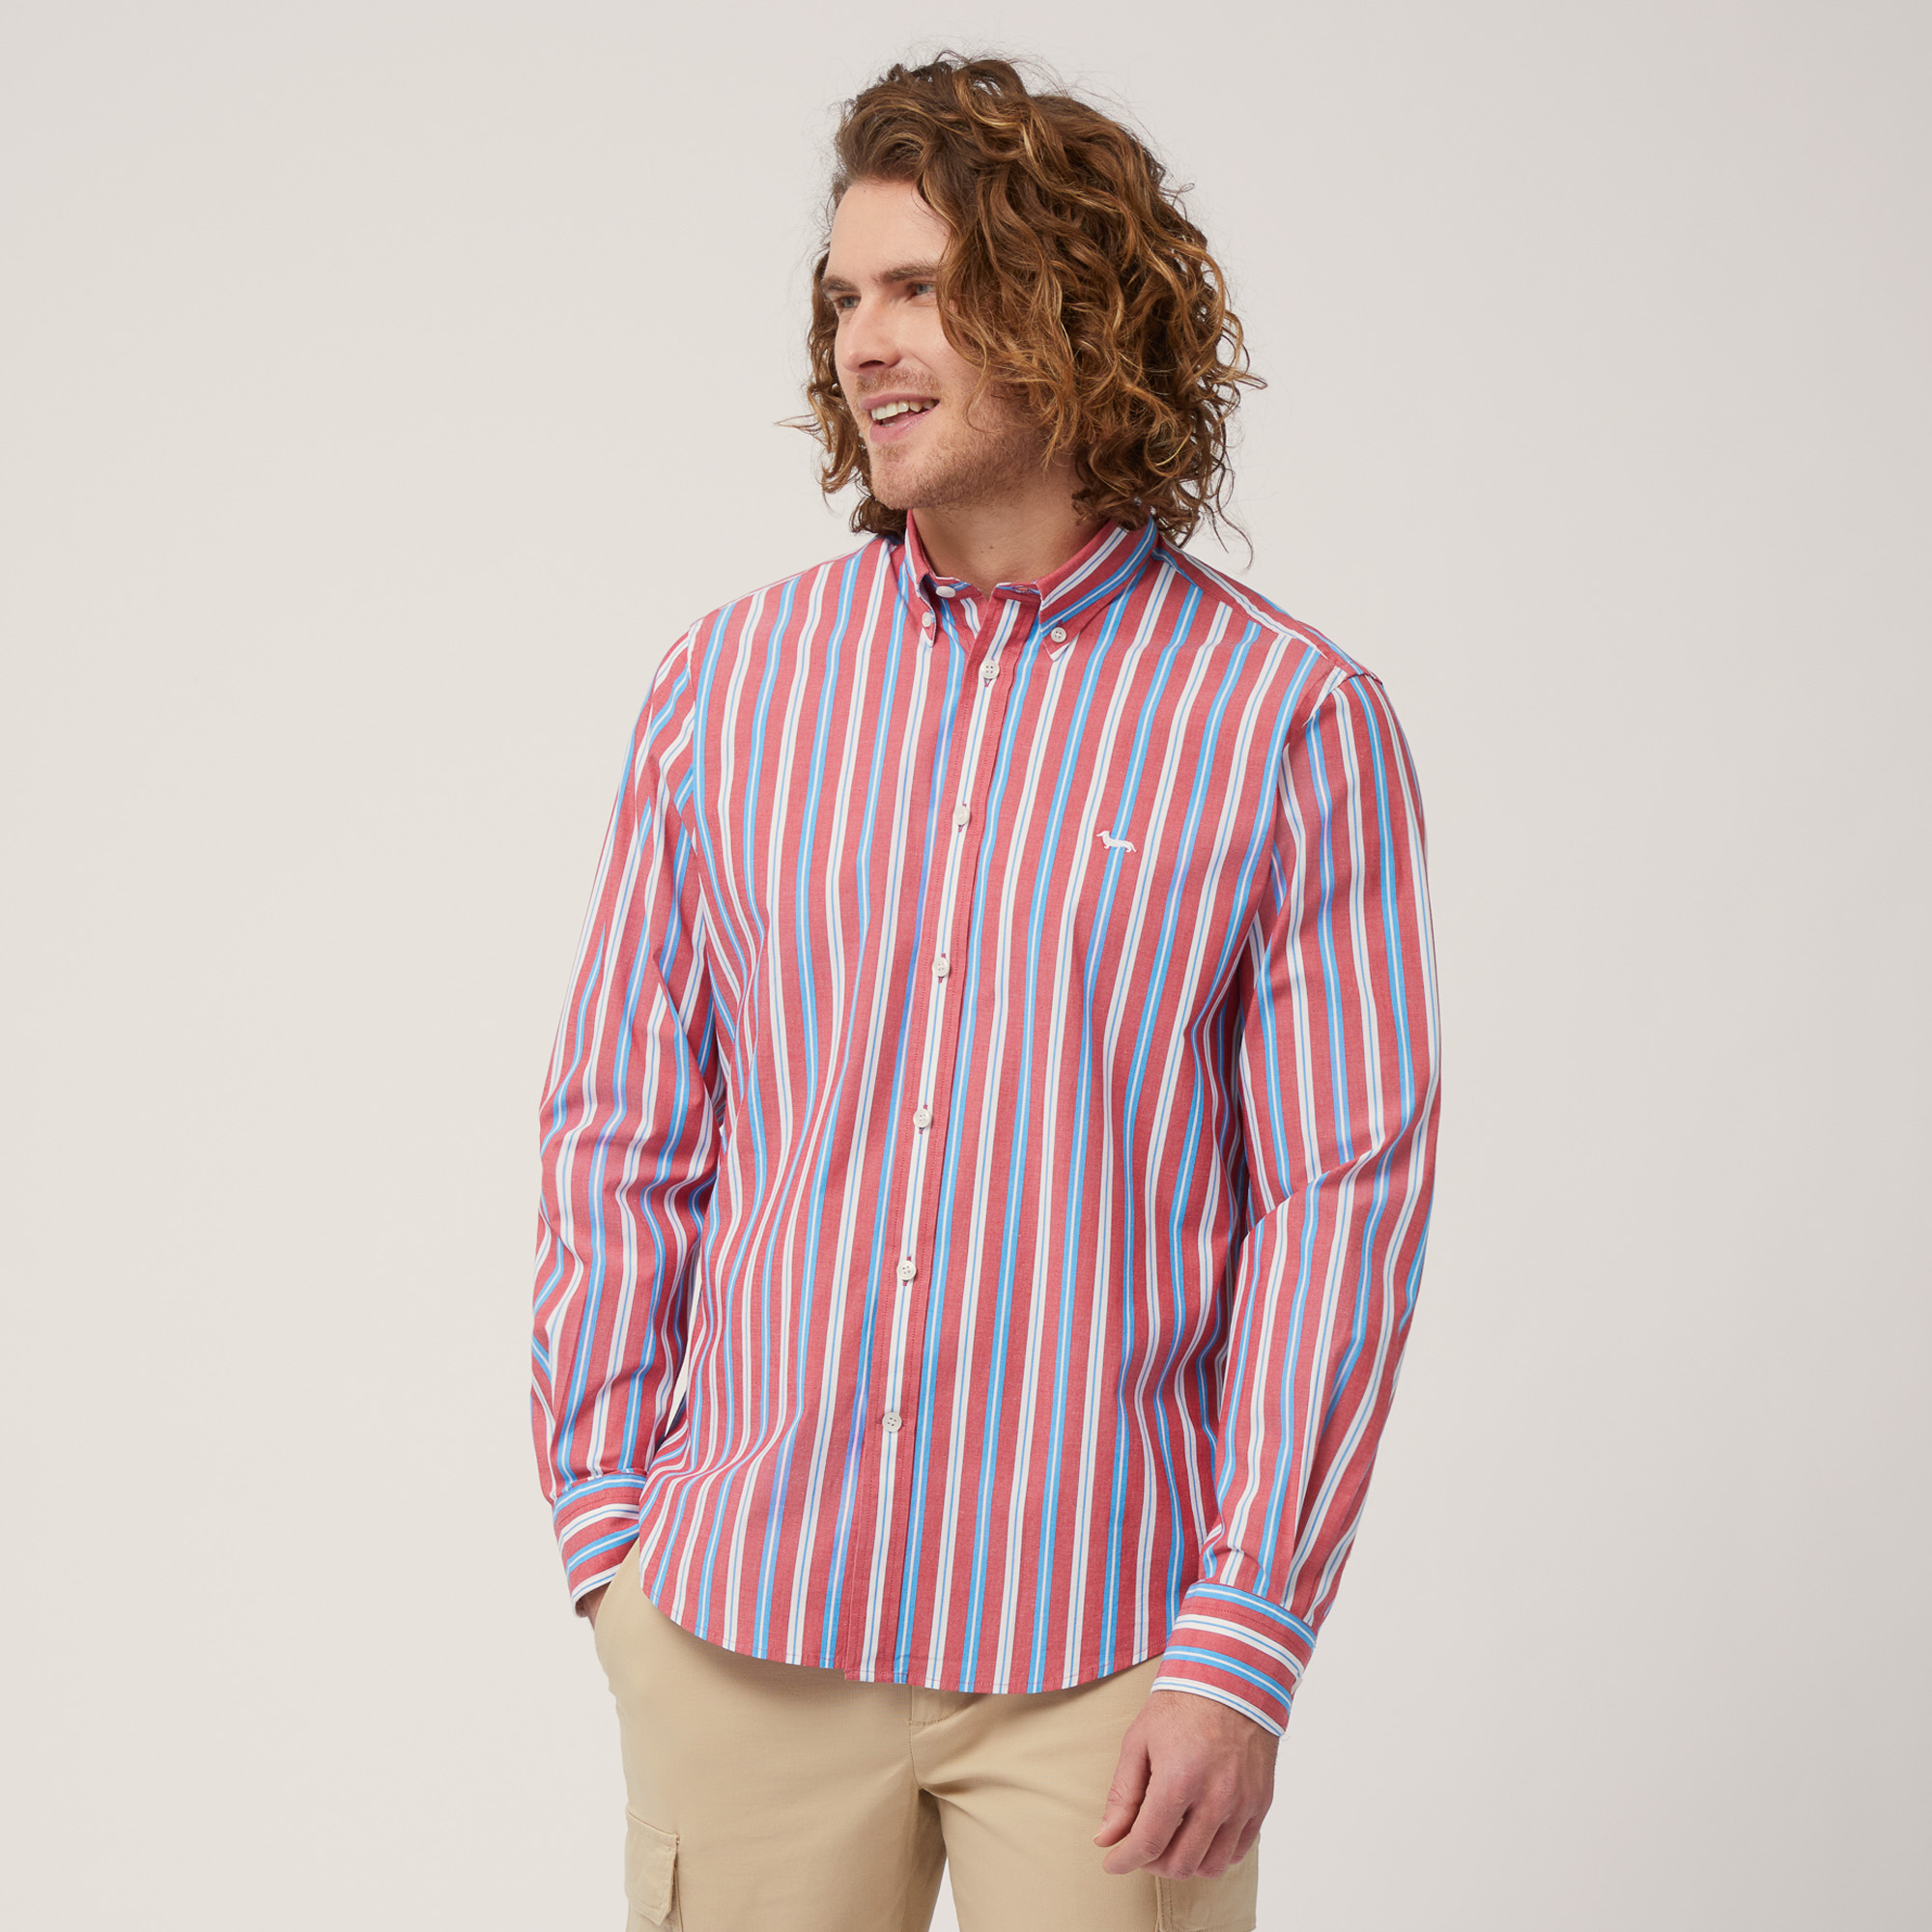 Stretch Cotton Shirt with Alternating Stripes, Light Red, large